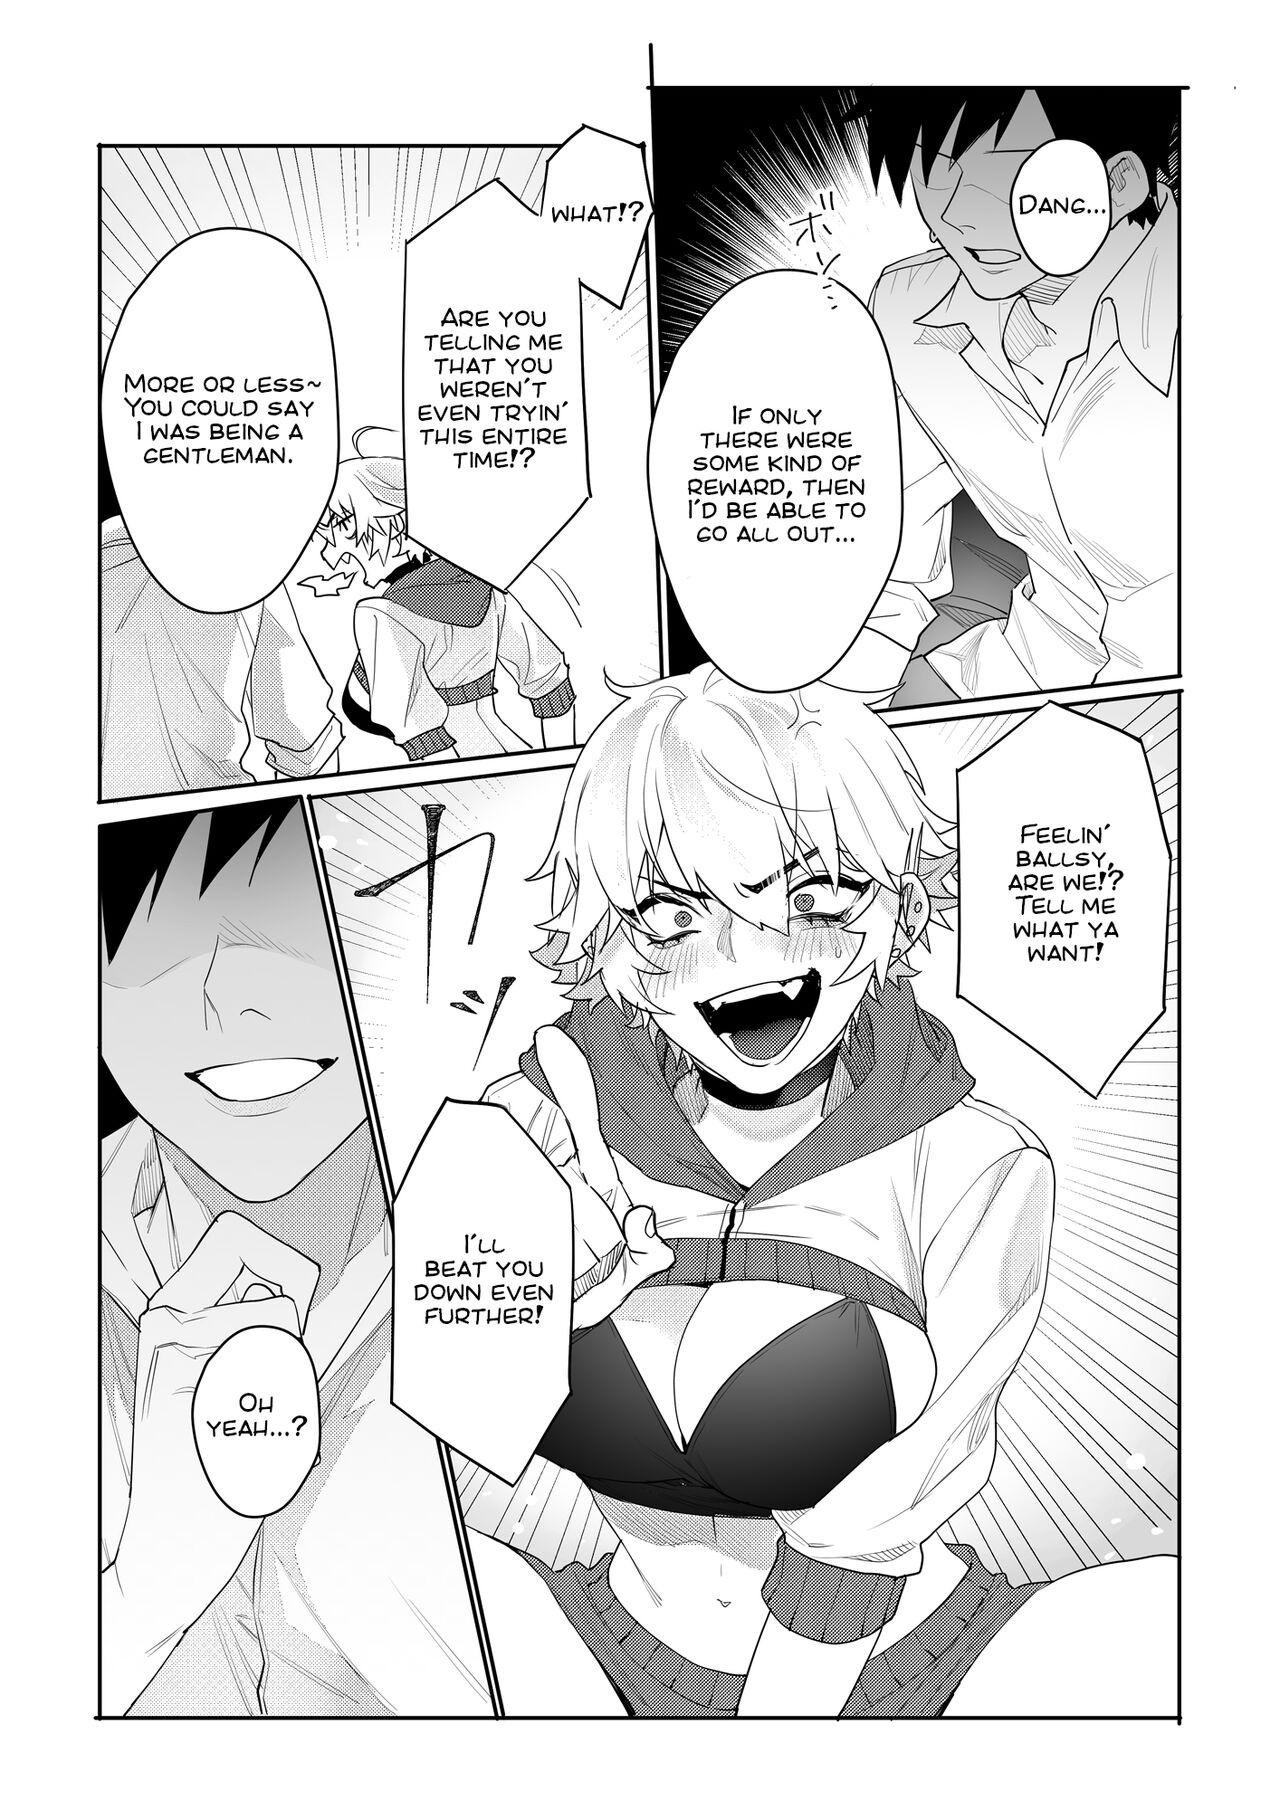 Sfm Gamer kanojo no oppai monde mita kekka… | What Happens if You Try to Fondle a Gamer Chick's Boobs... - Original Mulher - Page 7